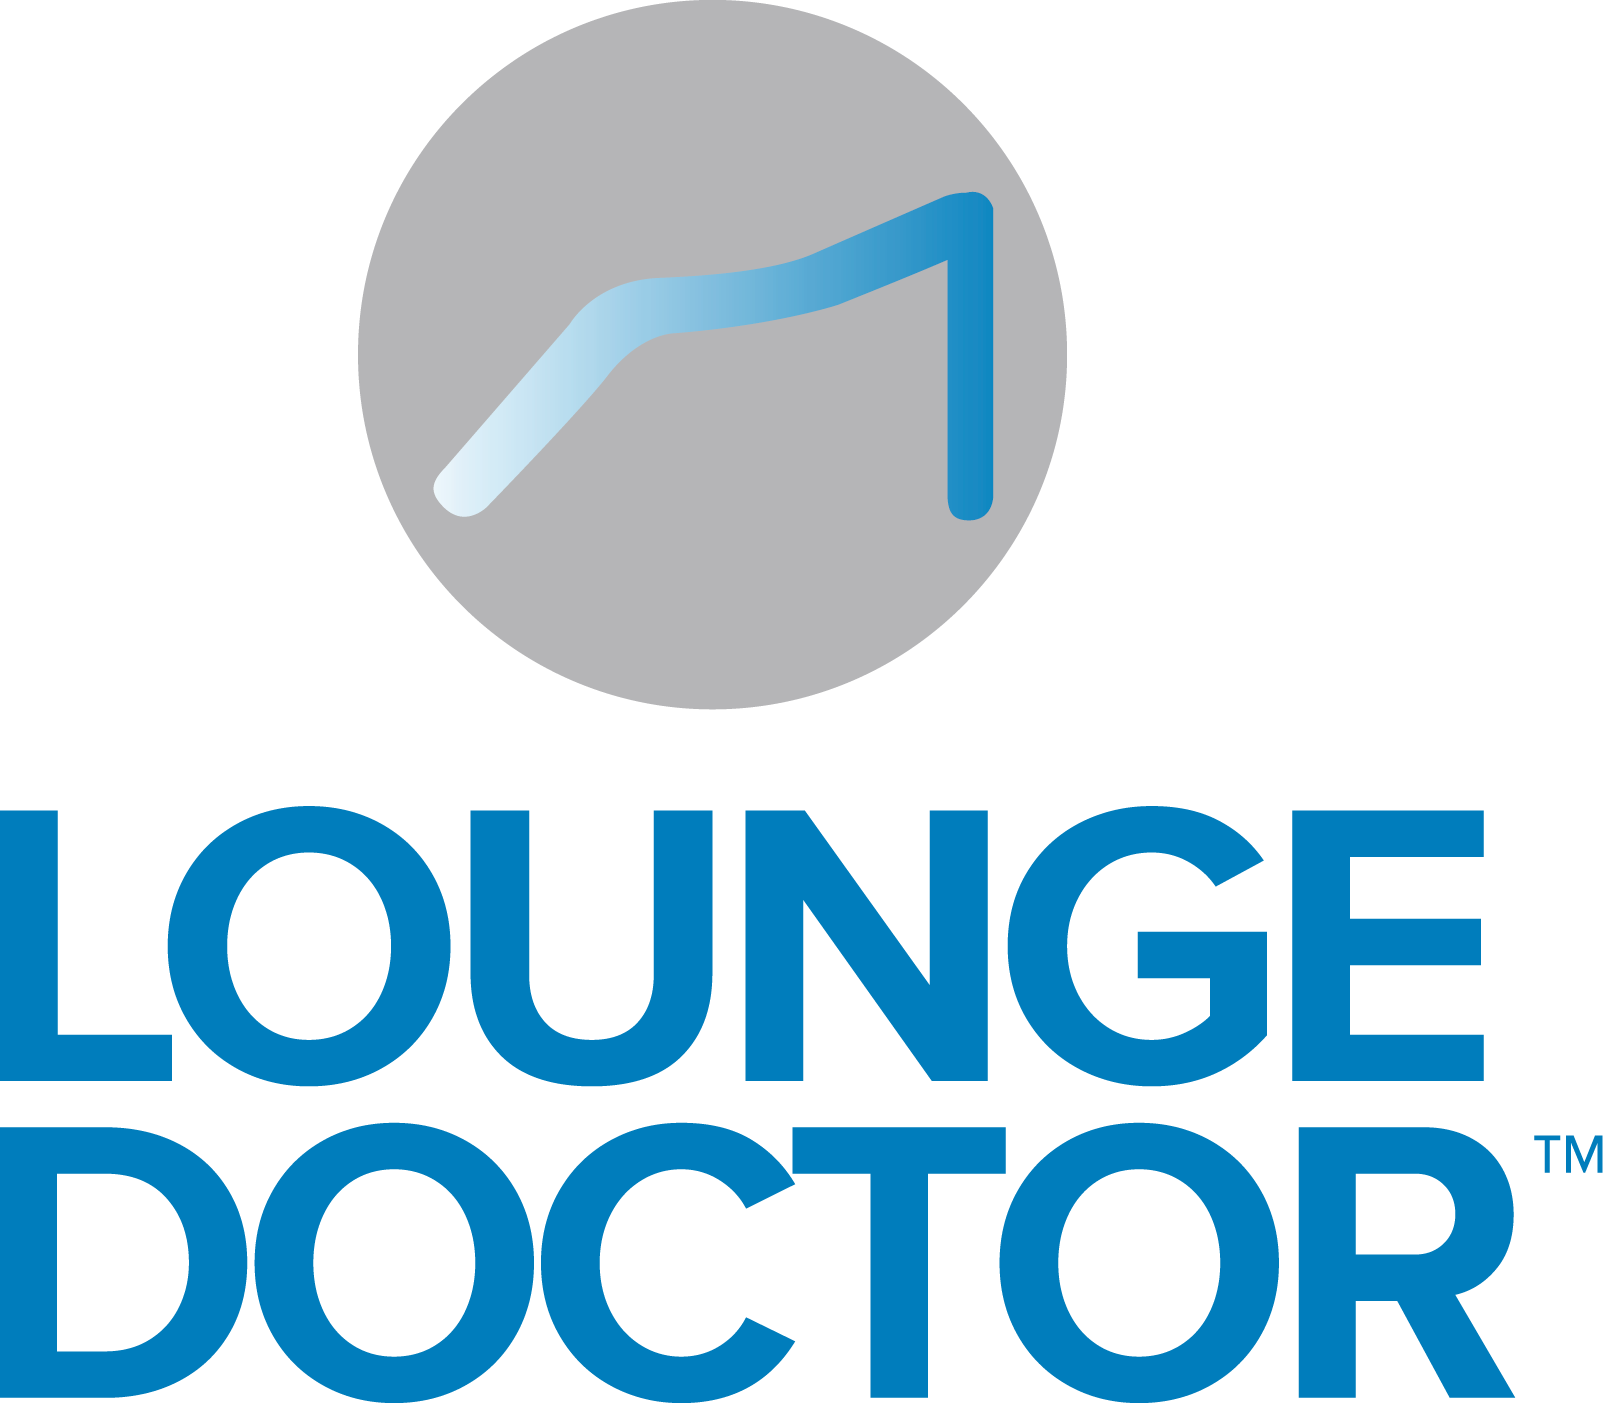 https://www.loungedoctor.com/cdn/shop/t/23/assets/logo-stacked.png?v=40792622437026346111669087870